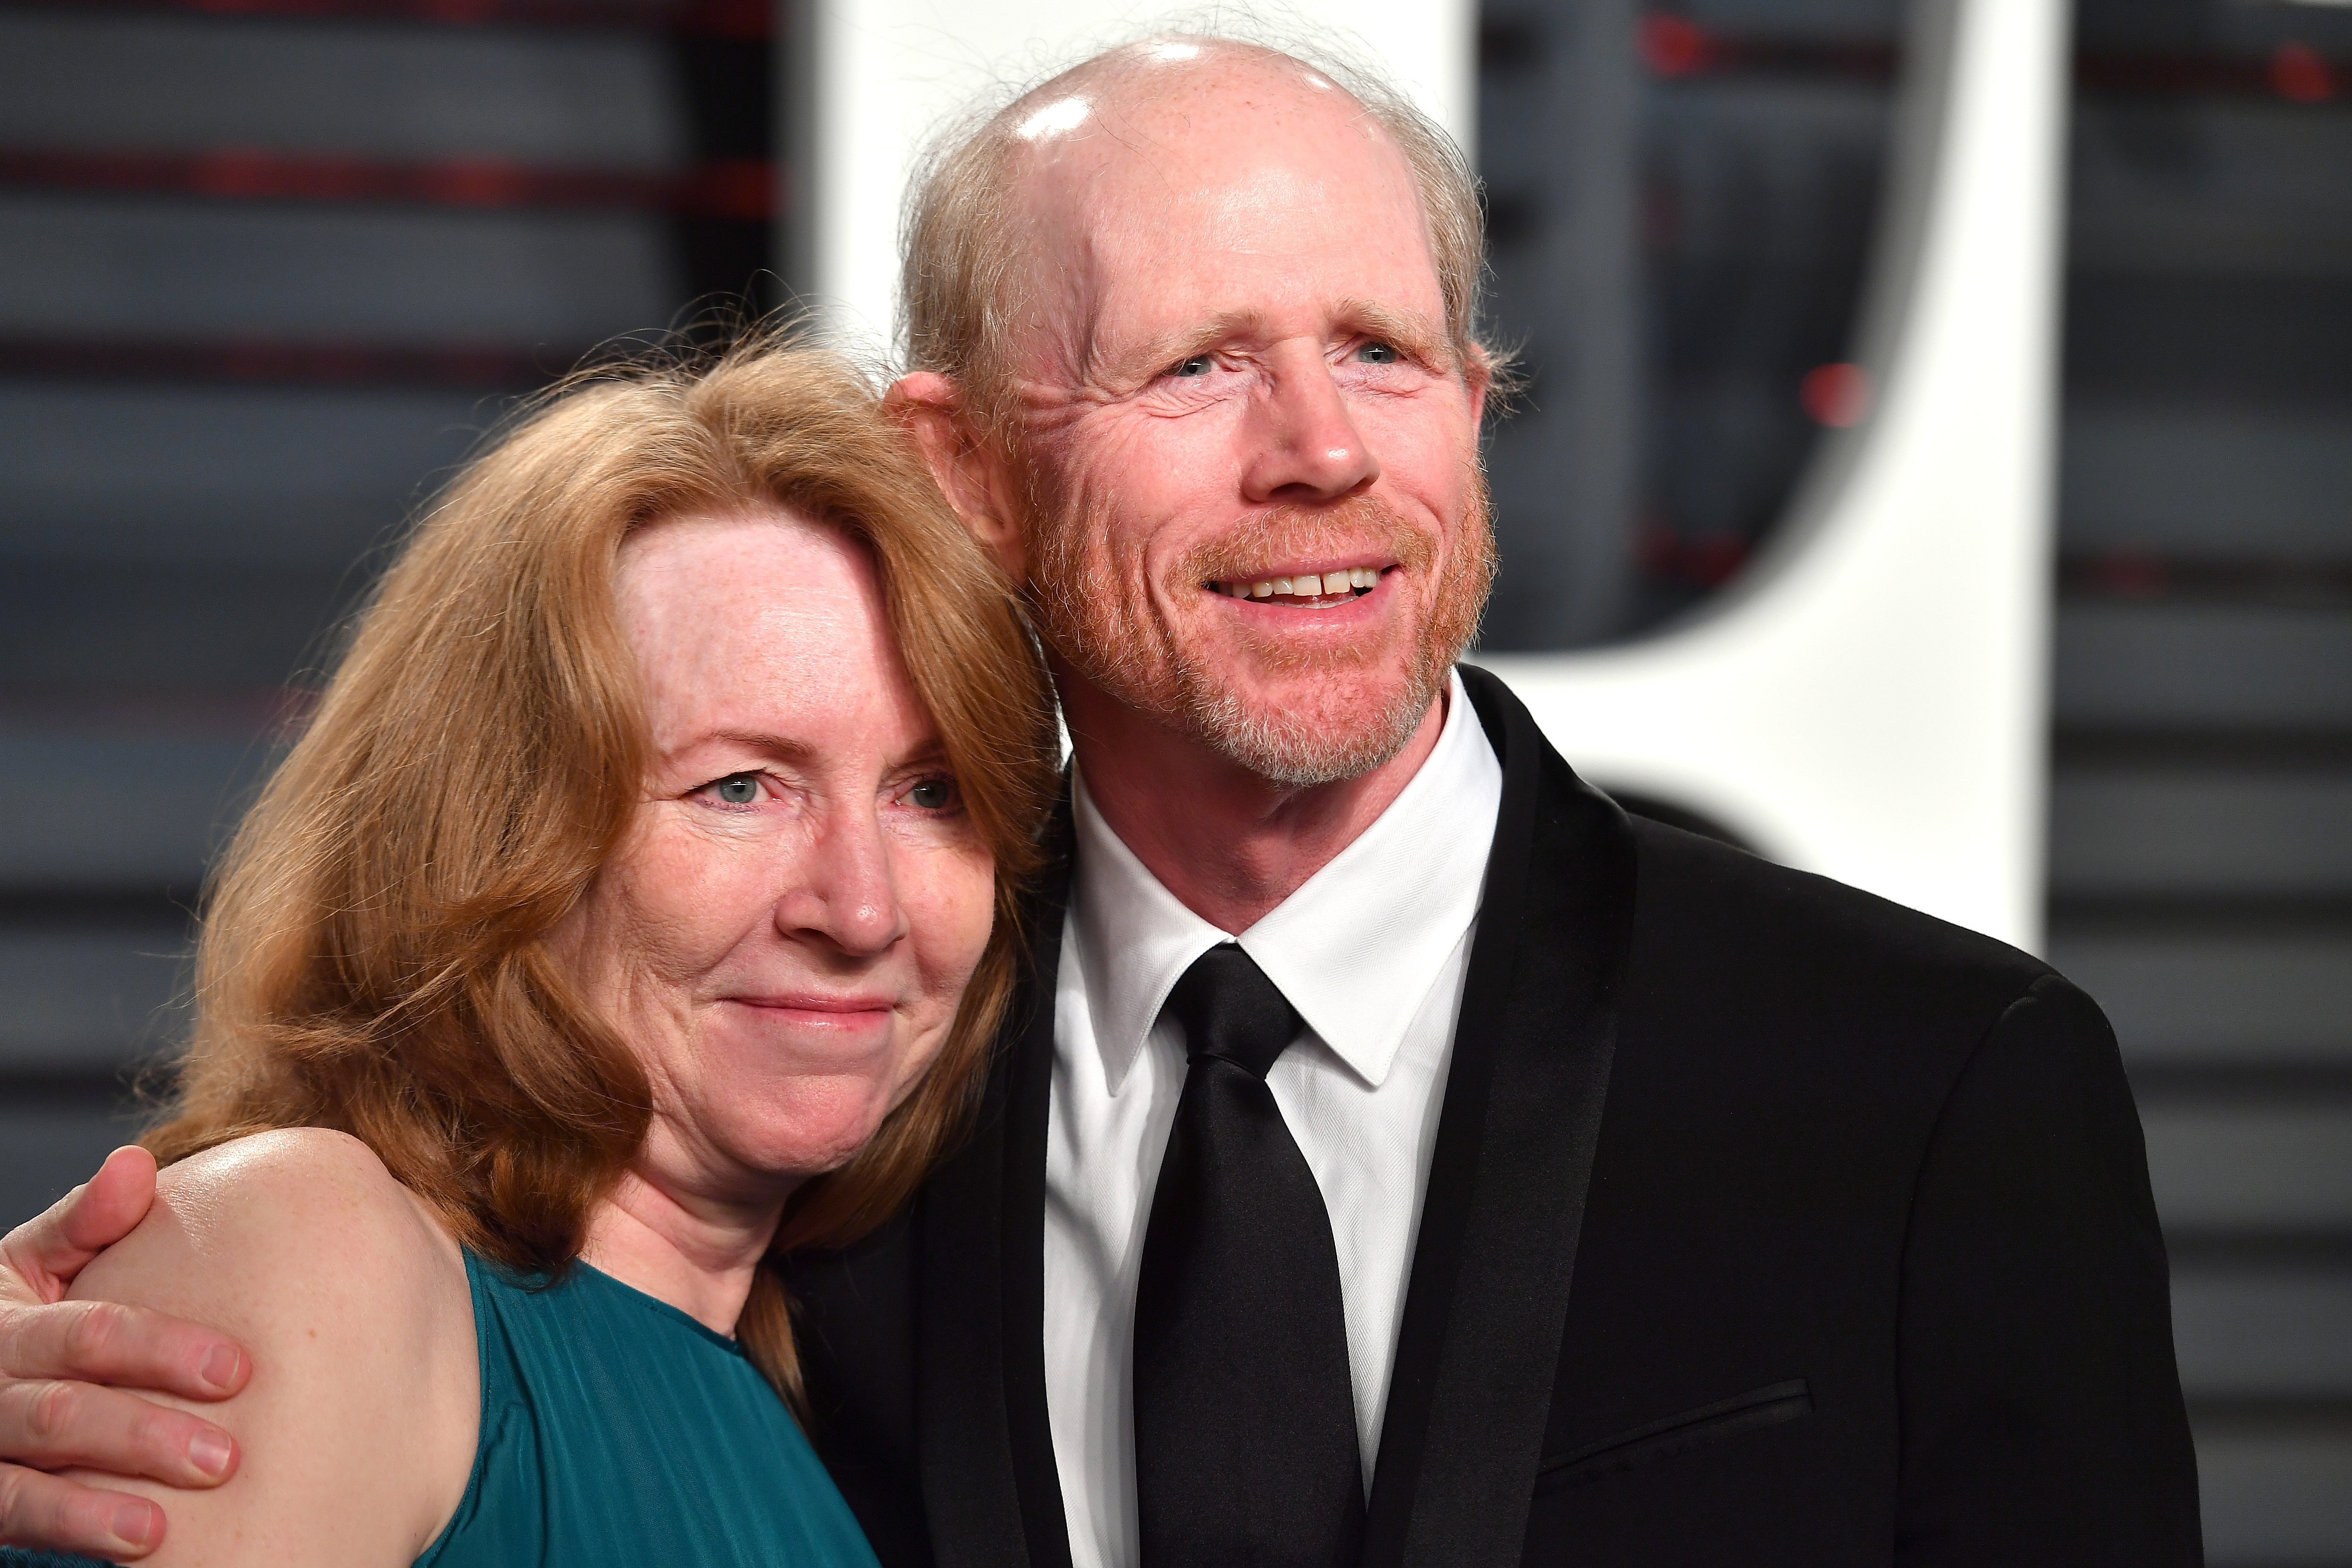 Actor Cheryl Howard (L) and filmmaker Ron Howard attend the 2017 Vanity Fair Oscar Party hosted by Graydon Carter at Wallis Annenberg Center for the Performing Arts on February 26, 2017 in Beverly Hills, California. | Source: Getty Images